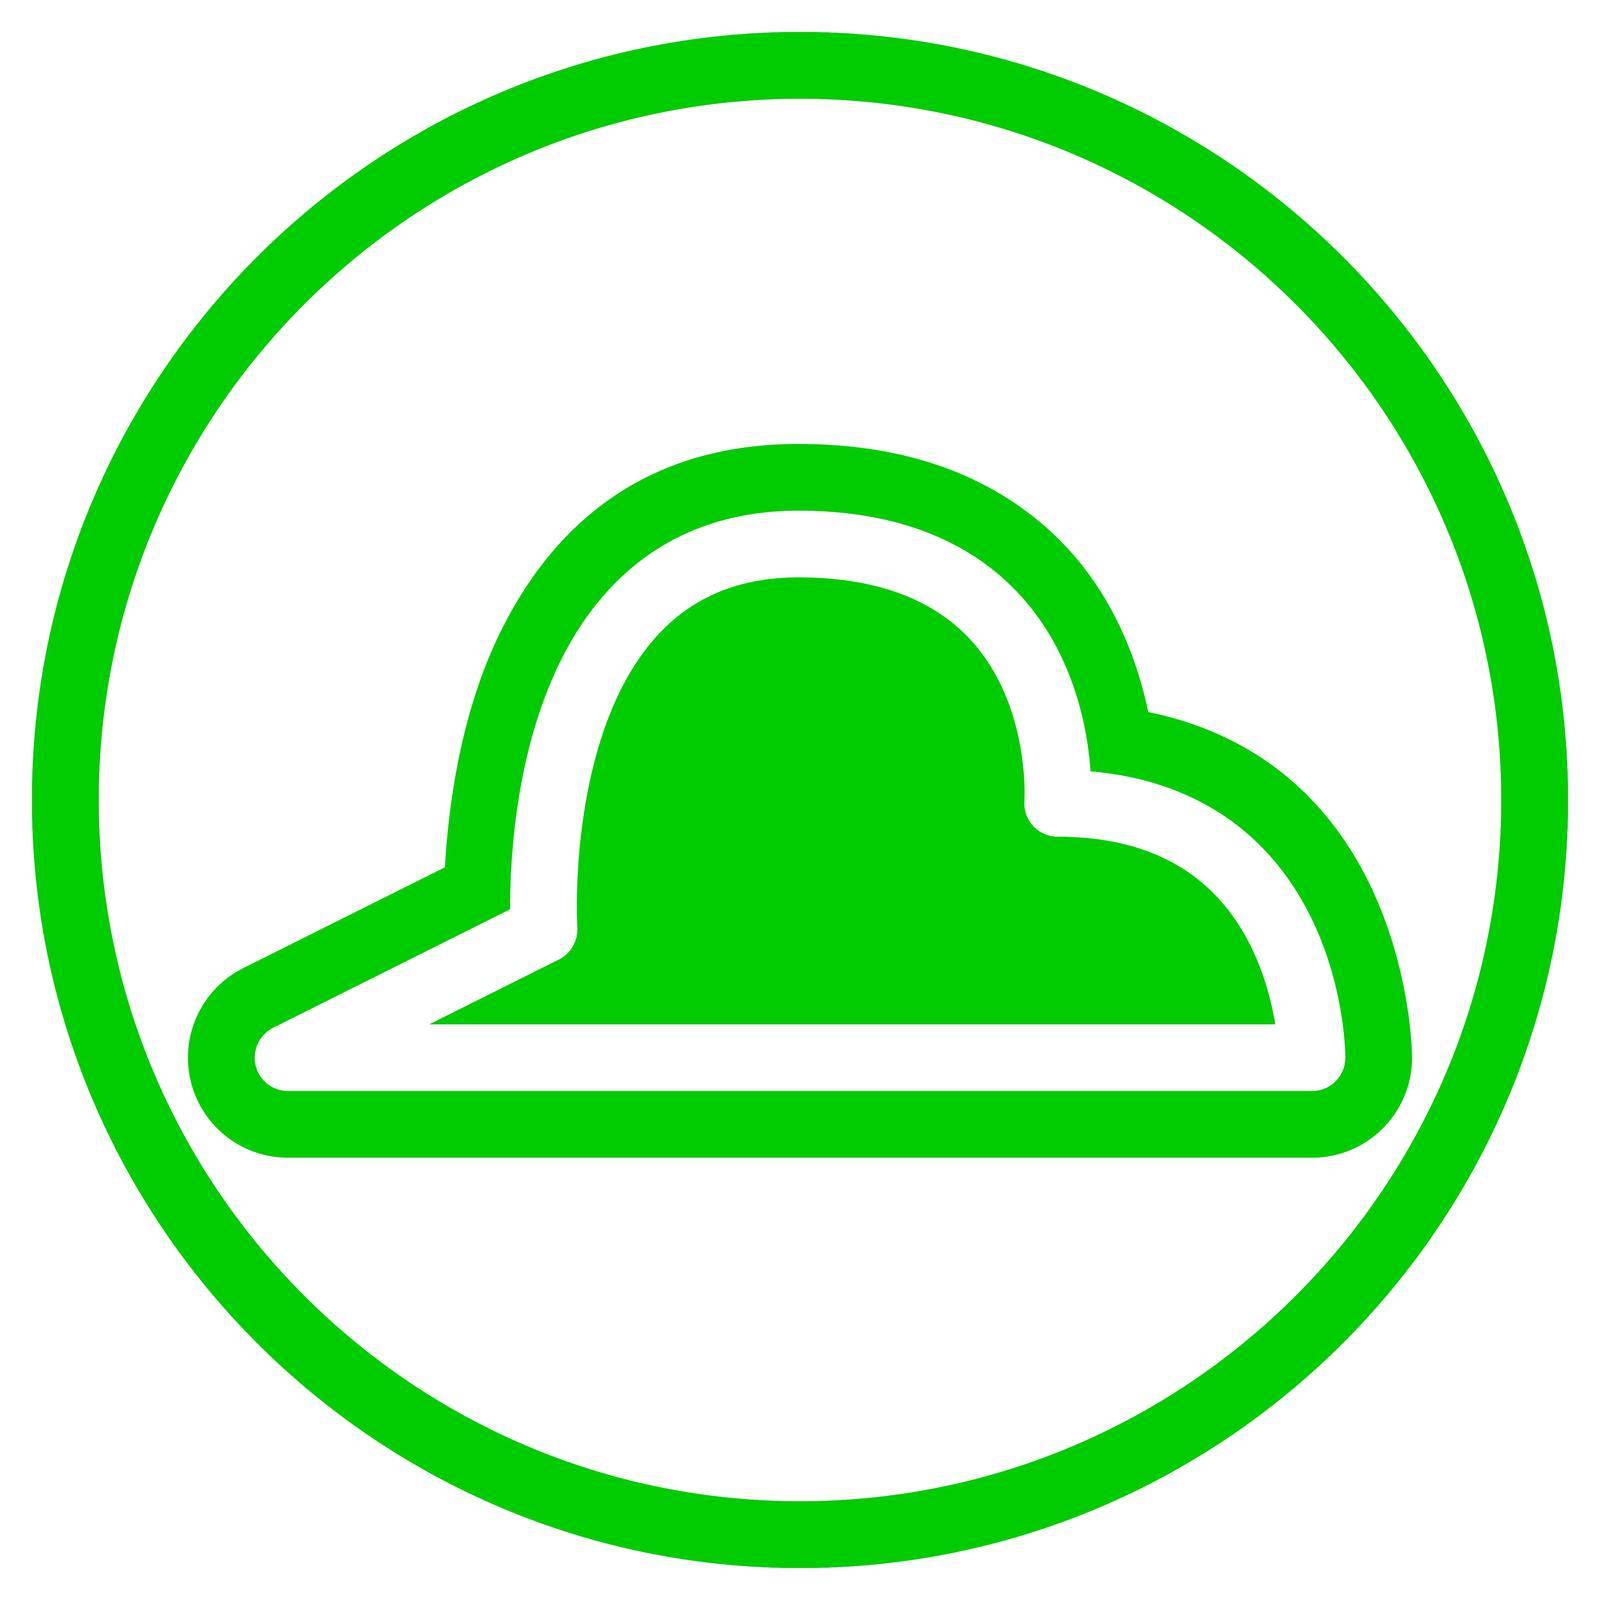 Sharp cloud icon in flat design with green color and outline on a line circle background.